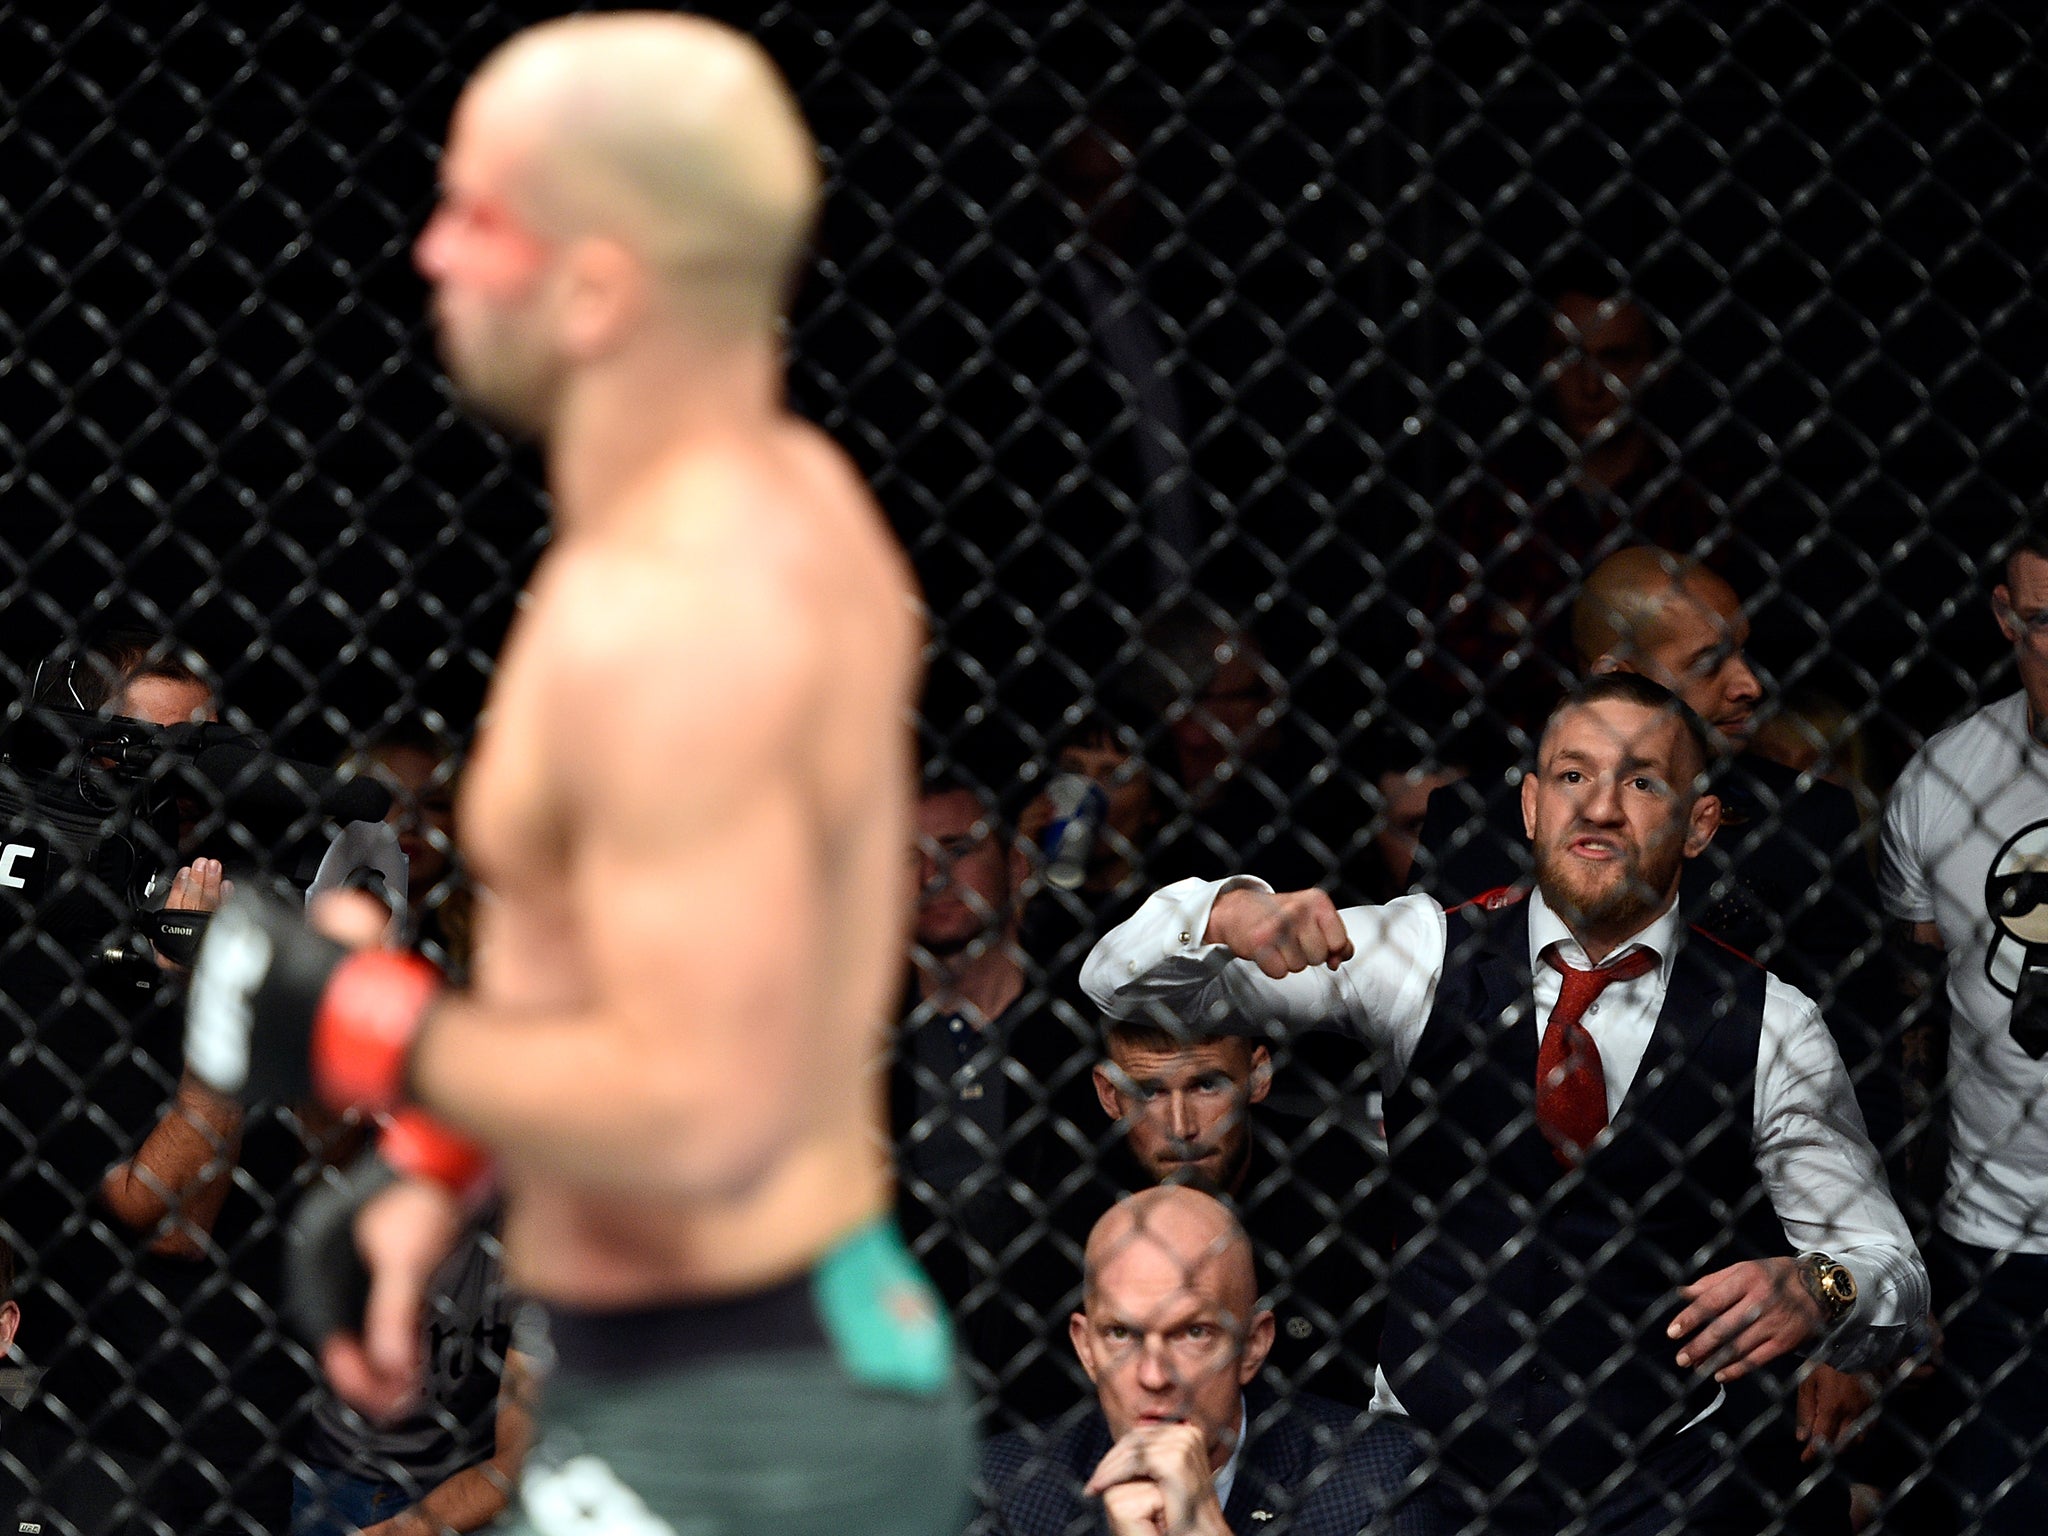 &#13;
McGregor was in Gdansk to support teammate Artem Lobov in his defeat by Andre Fili &#13;